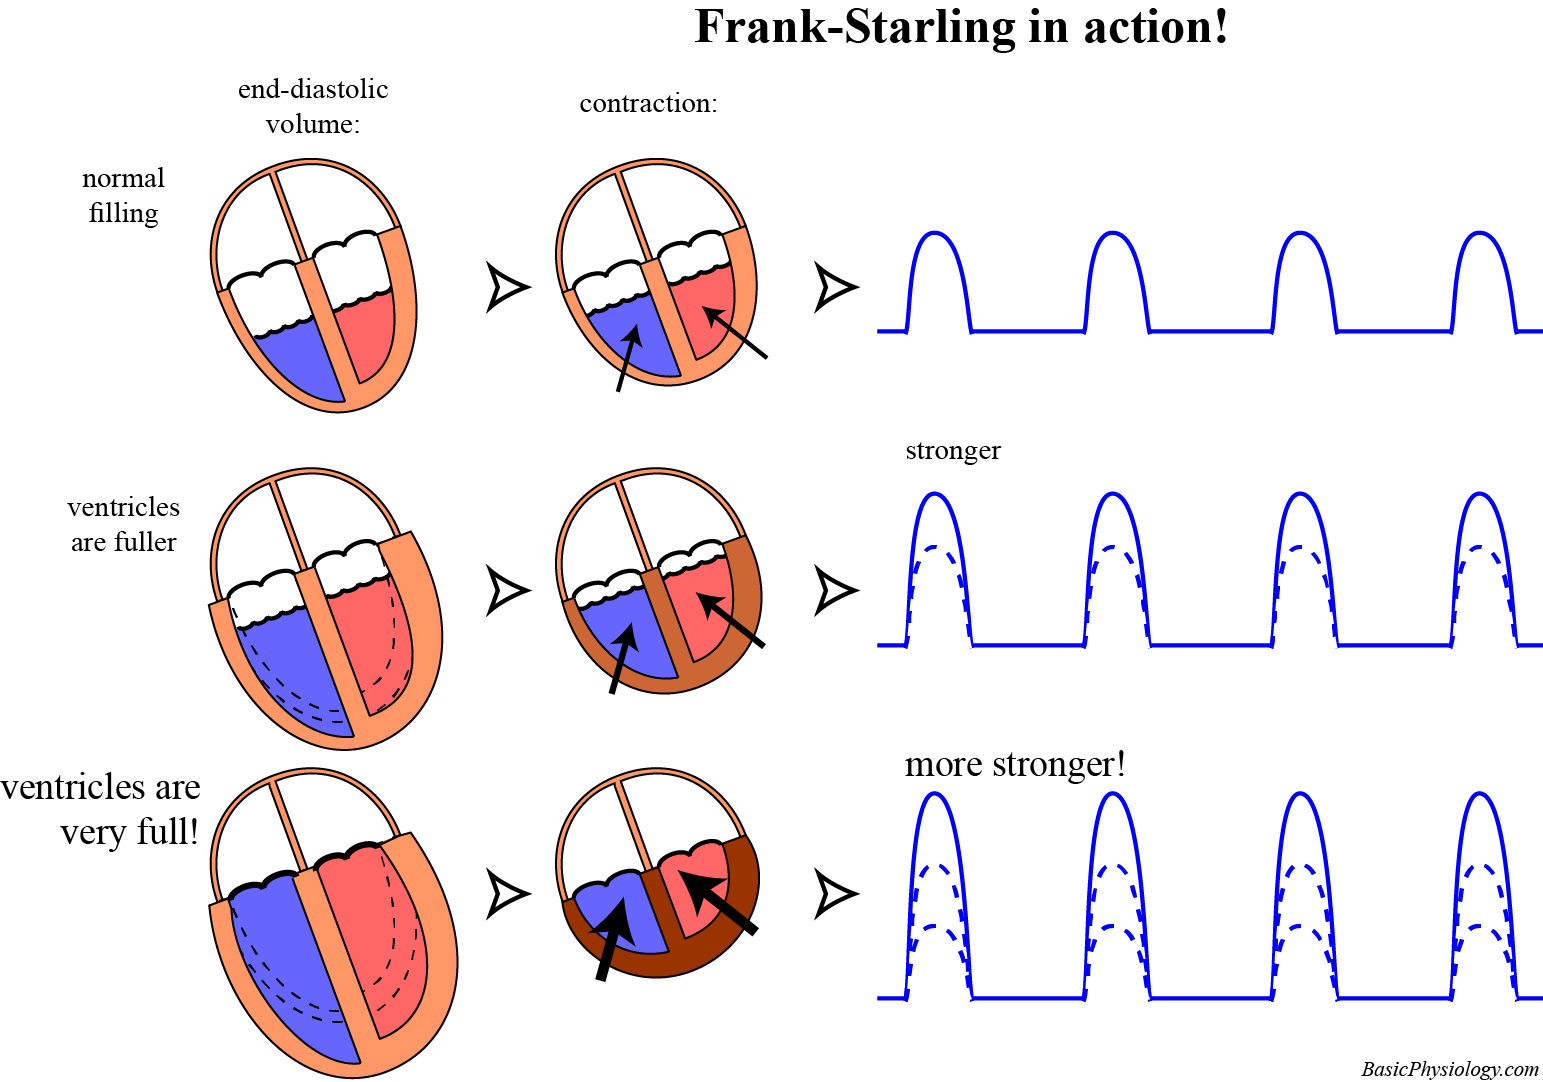 The Frank-Starling system in the heart